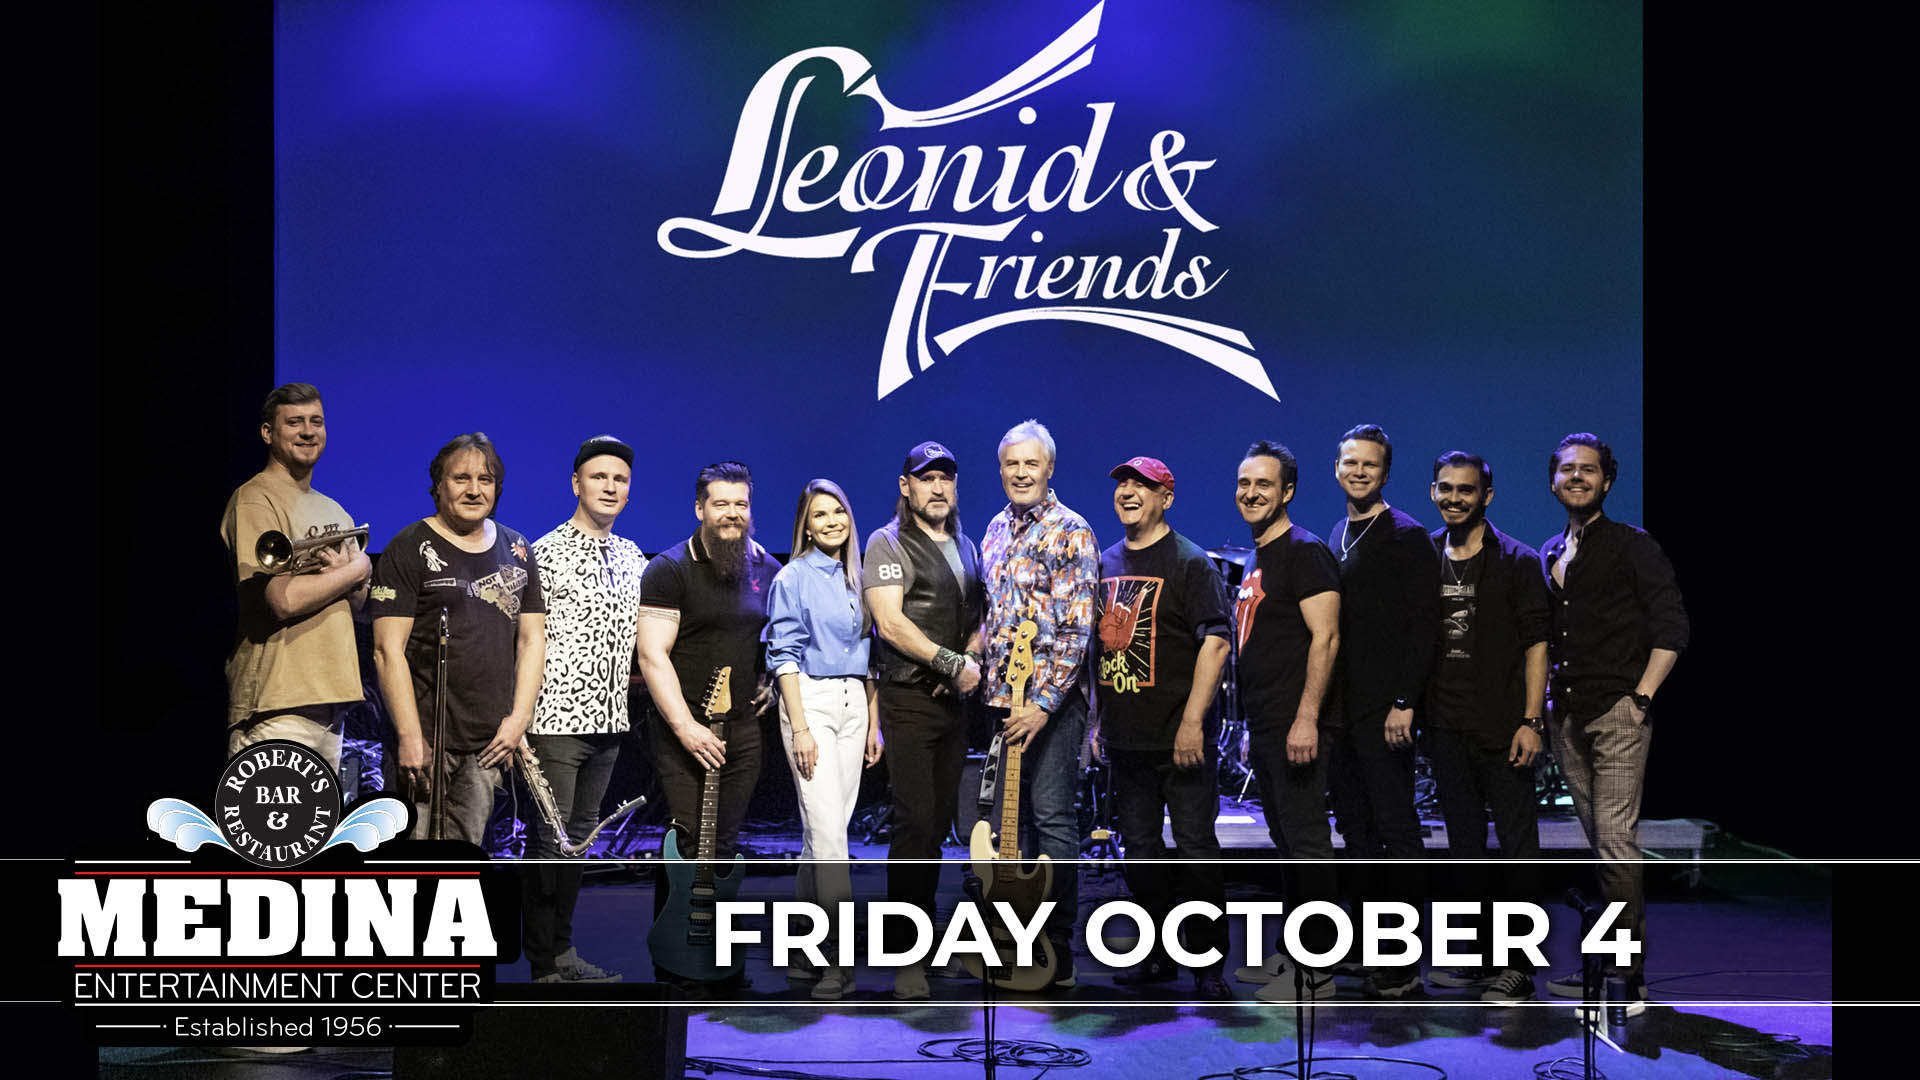 Leonid & Friends Bringing the best of Chicago, Earth, Wind and Fire, Steely Dan and more! Friday, October 4 Medina Entertainment Center Doors: 7:00PM | Music: 8:00PM | 21+ Gold Reserved $55 / Silver Reserved $51 / General Seating $41 (plus applicable fees)